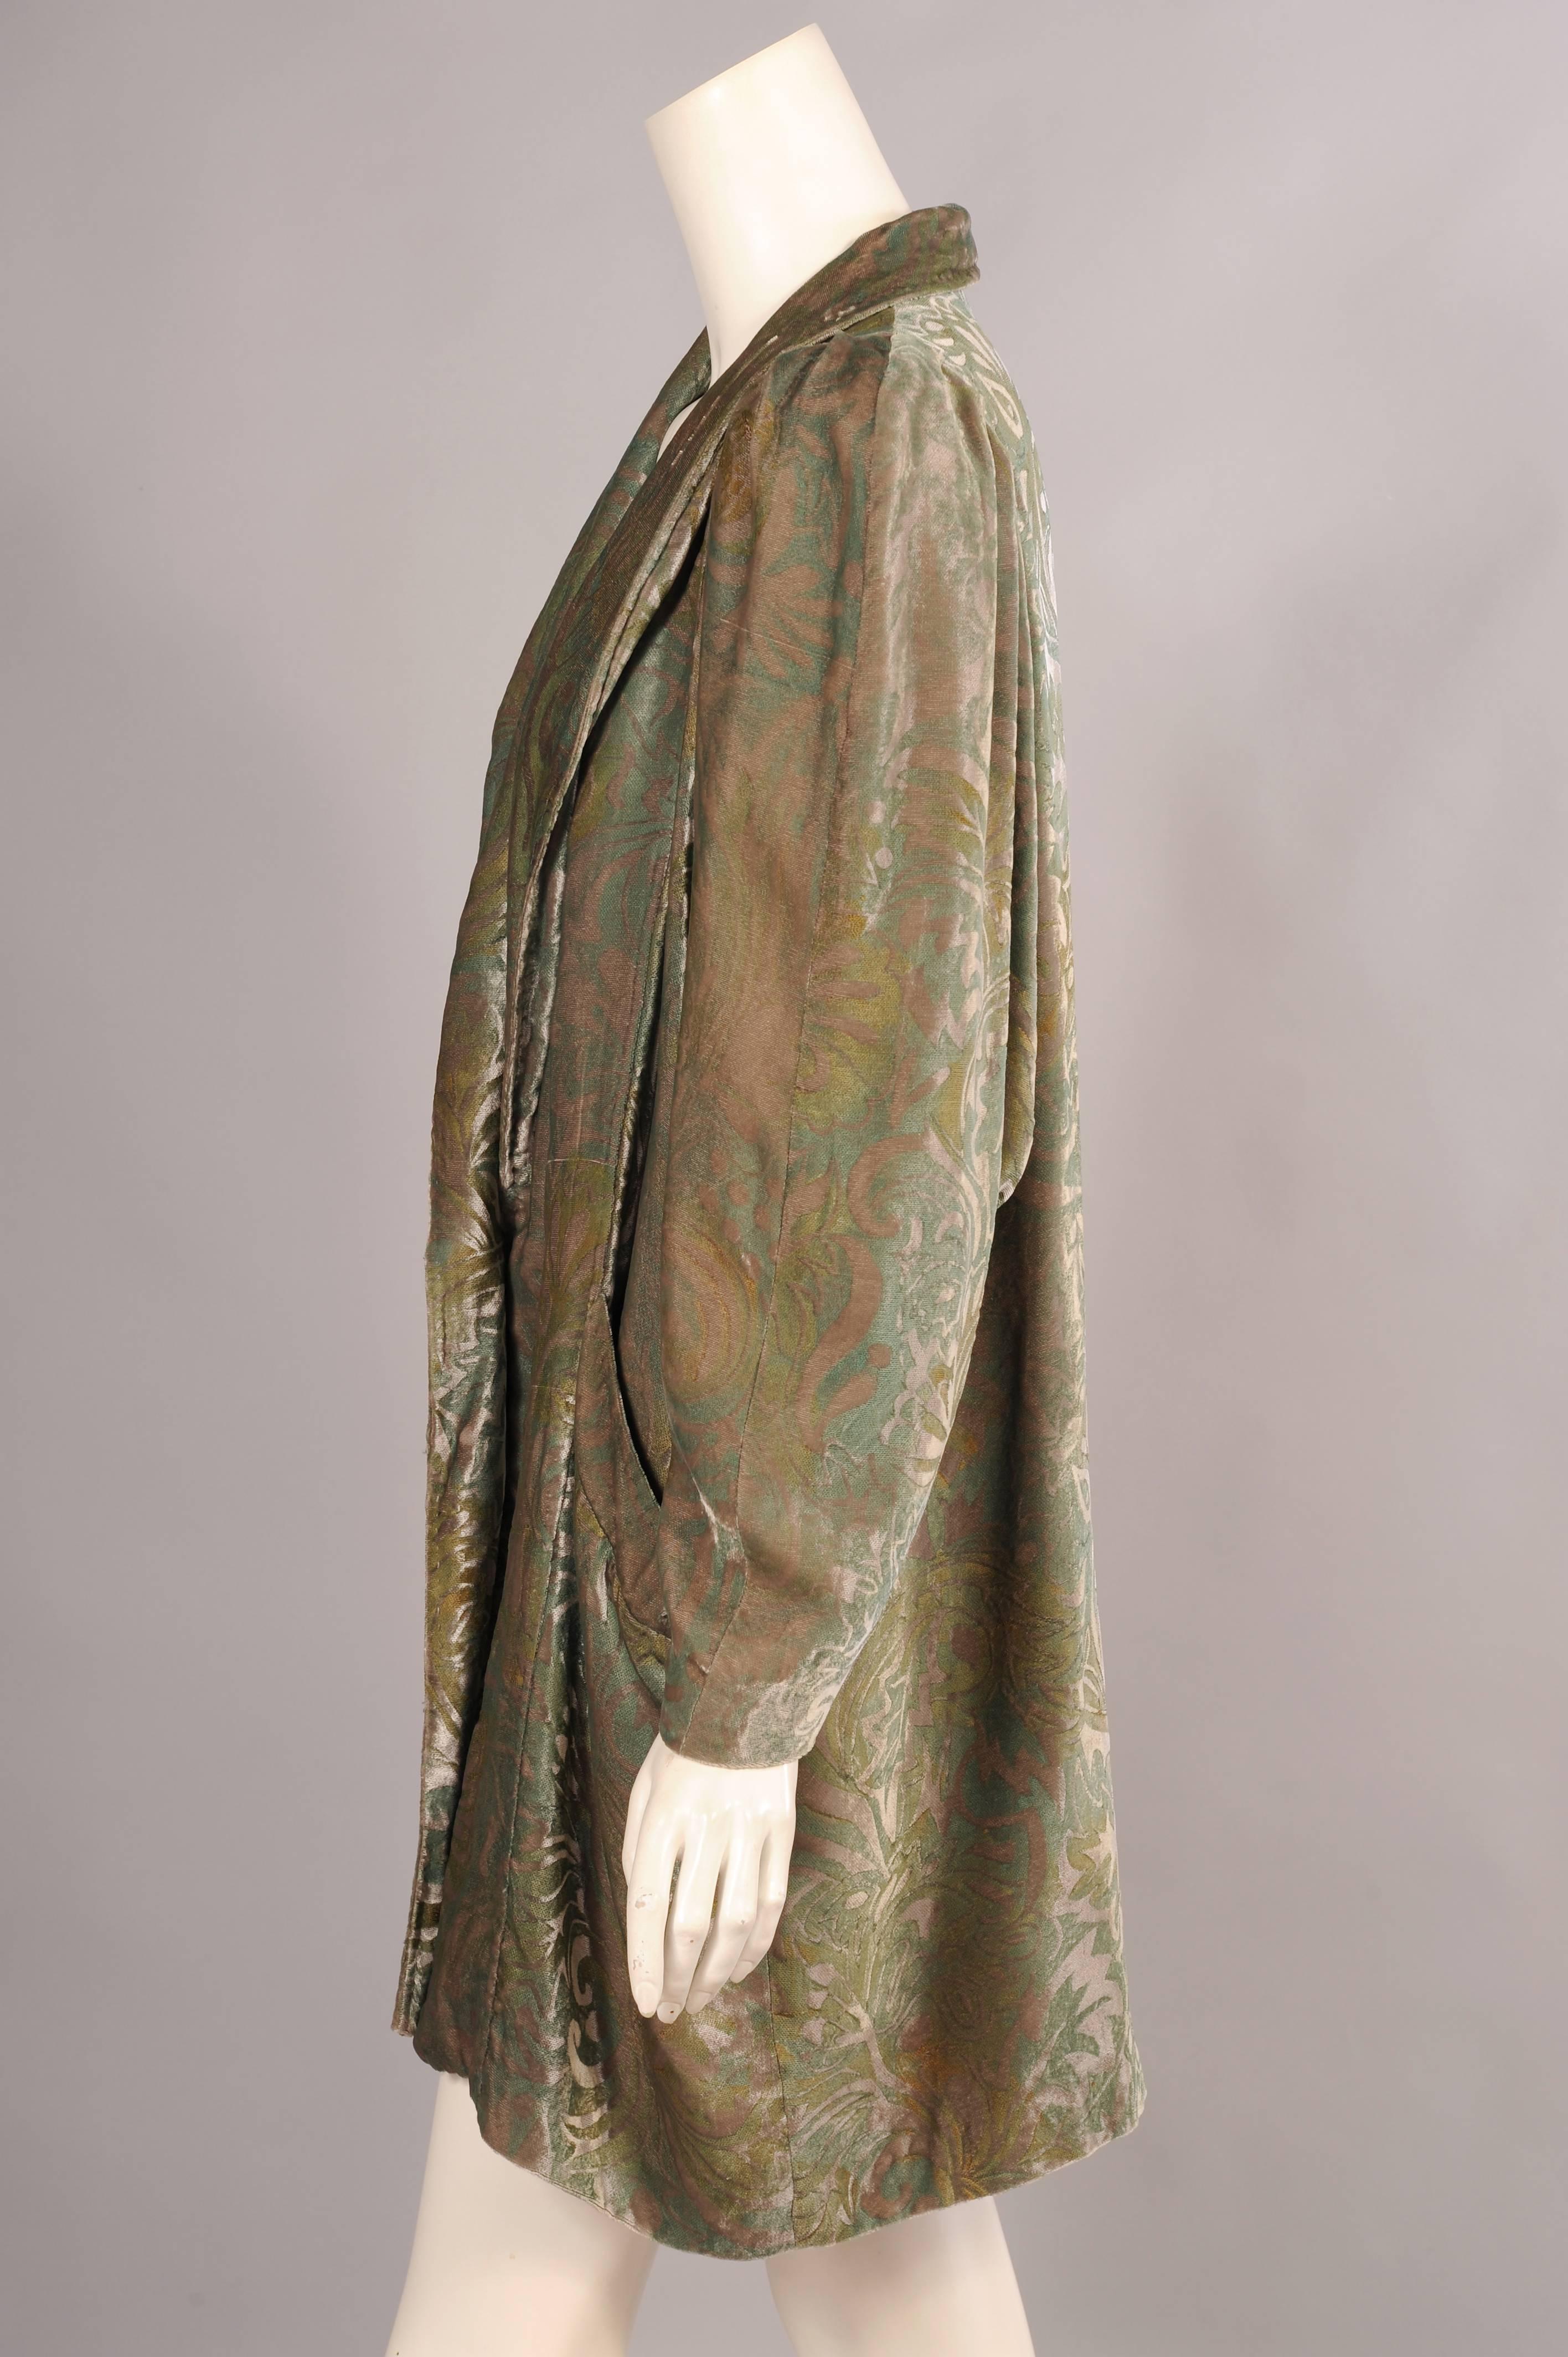 Silver grey, pale green and gold all combine in this stenciled design on the velvet evening jacket or coat. Created in the 1920's in the style of Fortuny or Gallenga unfortunately this coat is not labeled or signed. It has a shawl collar, full